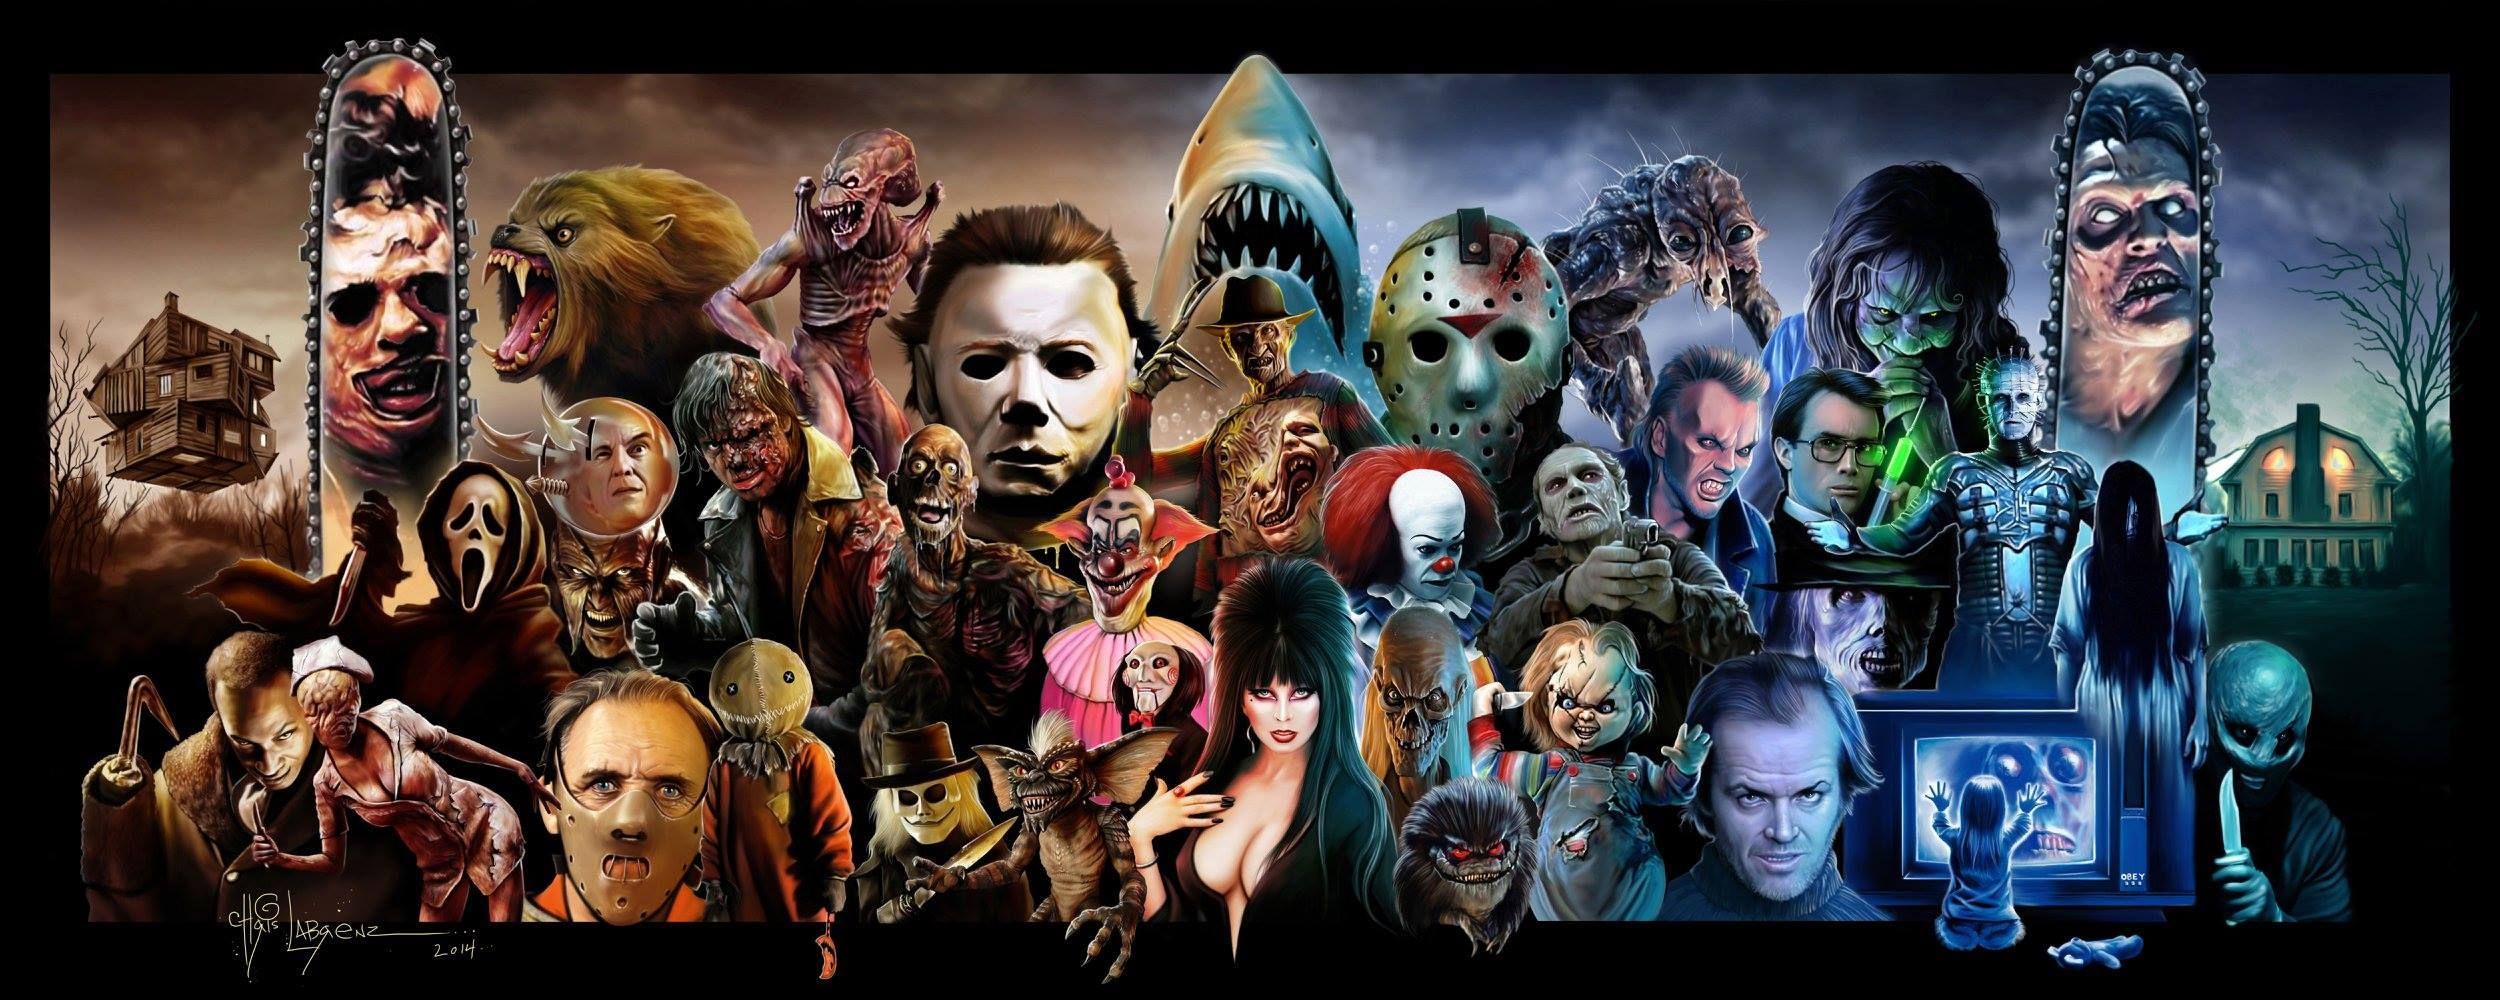 Classic Horror Movies Wallpapers Hd - Horror Movie Collage - 2500x1000  Wallpaper 